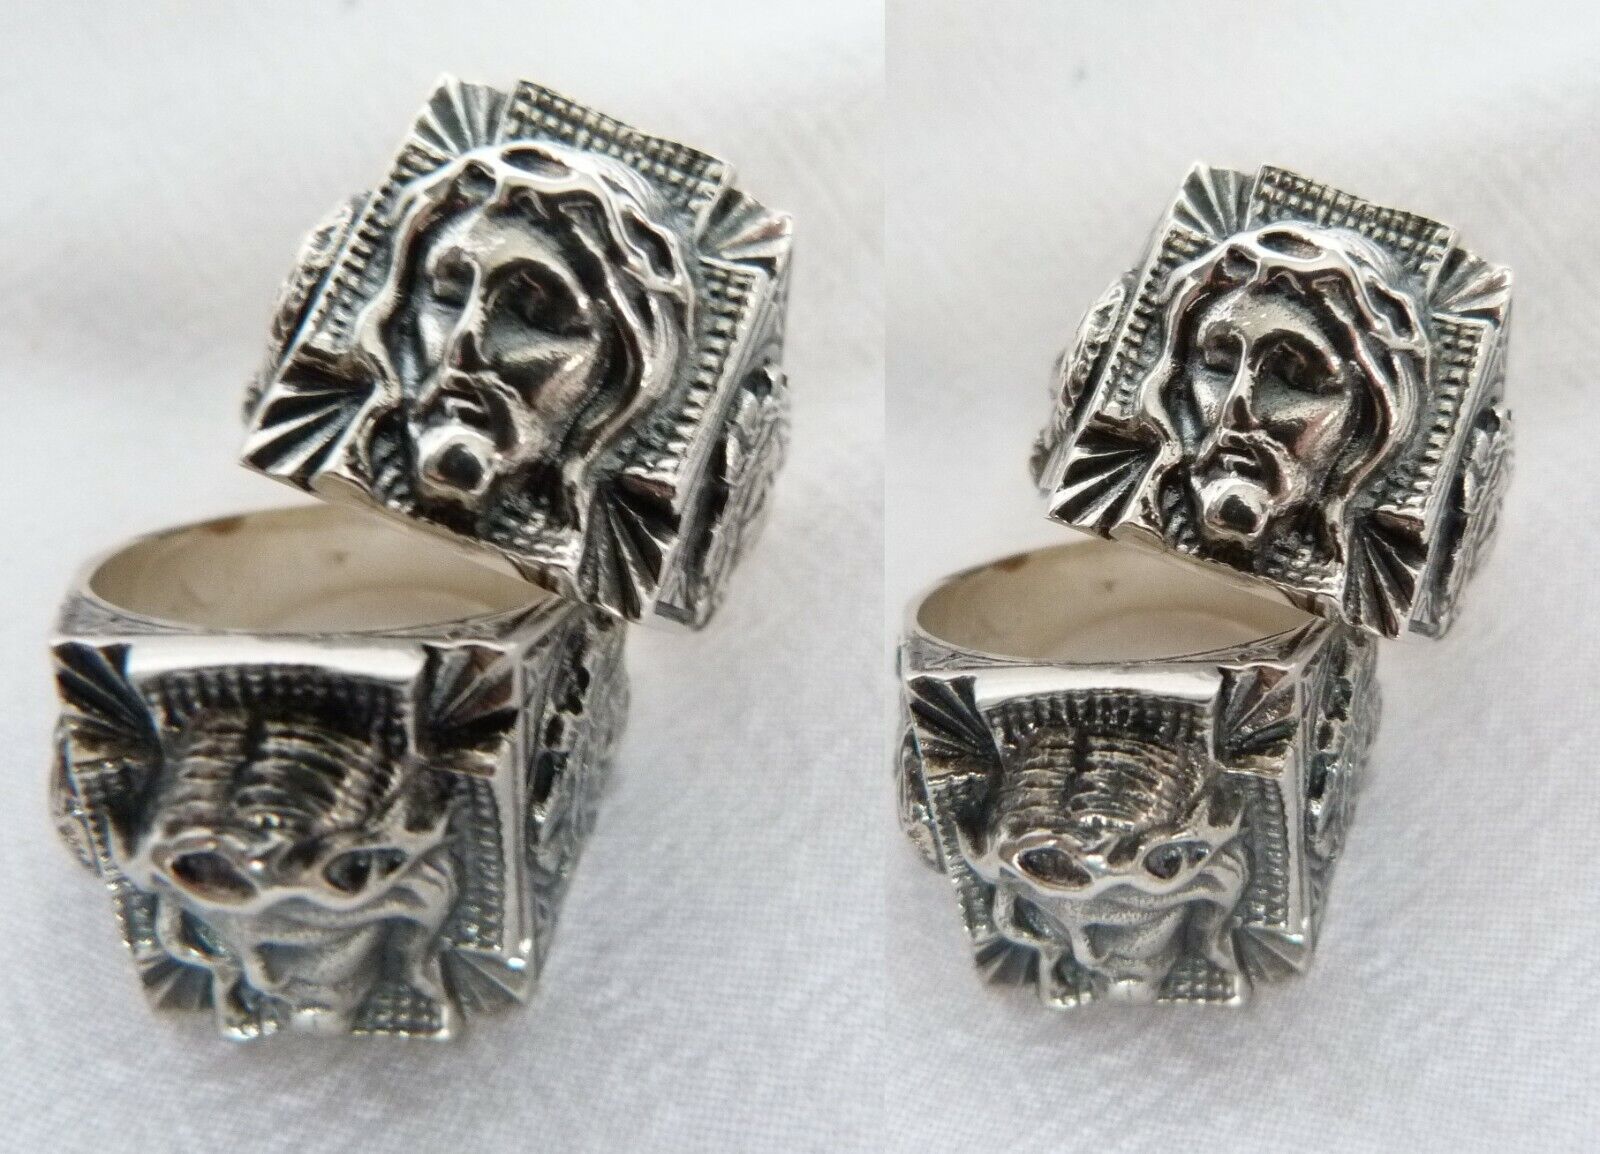 the face of Jesus on the cross RINGl - Sterling   Silver 925